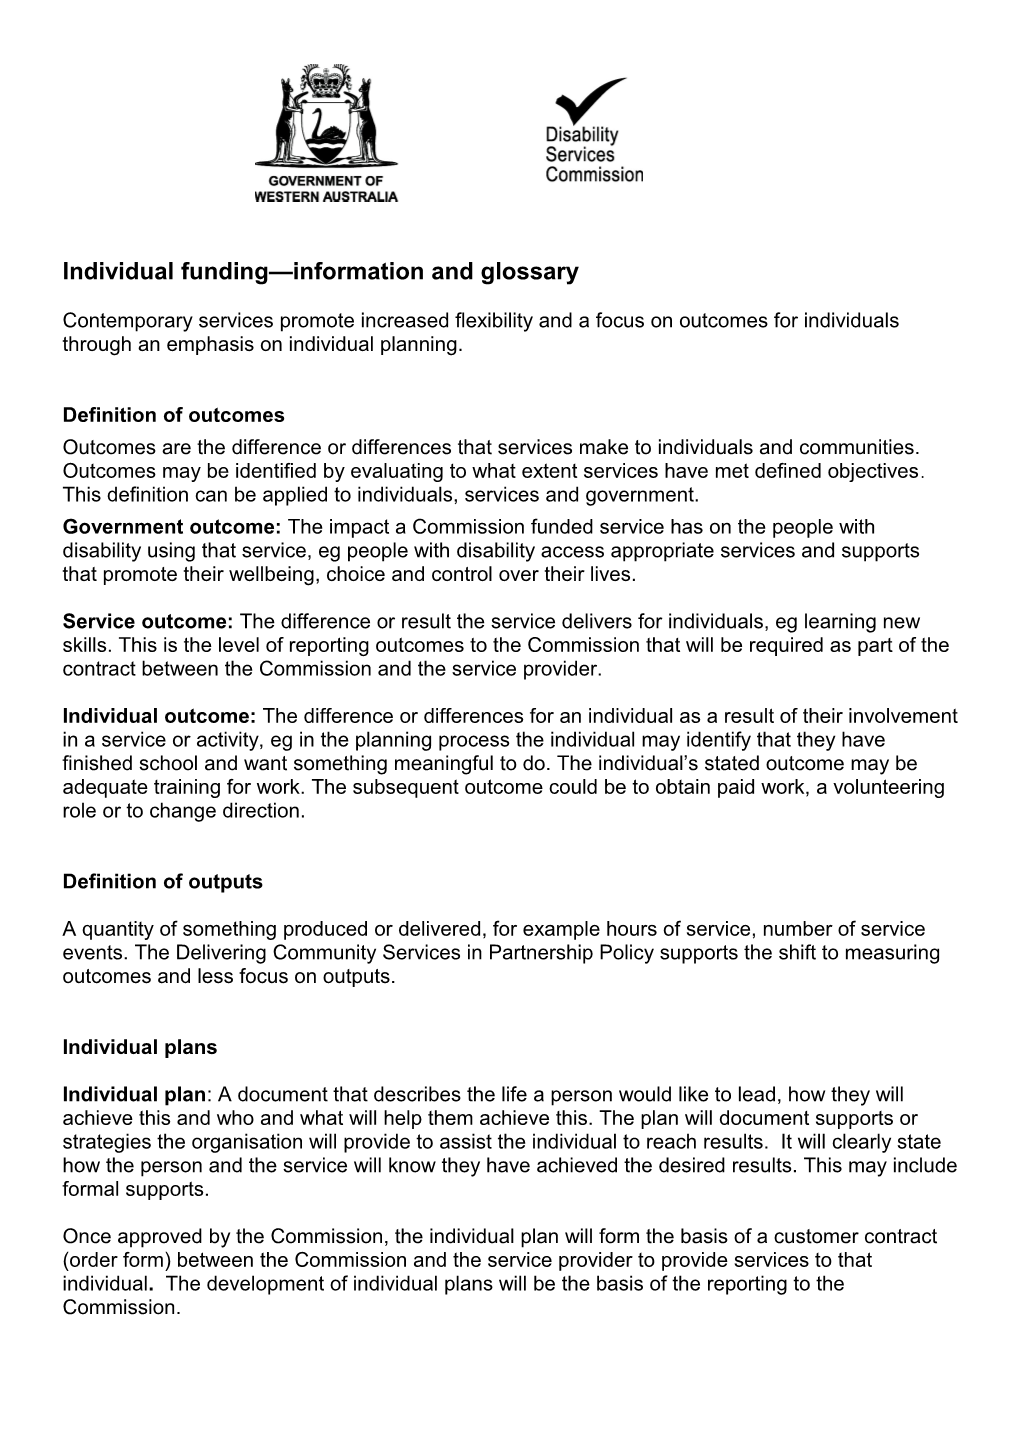 Individual Funding - Information and Glossary Feb 2013